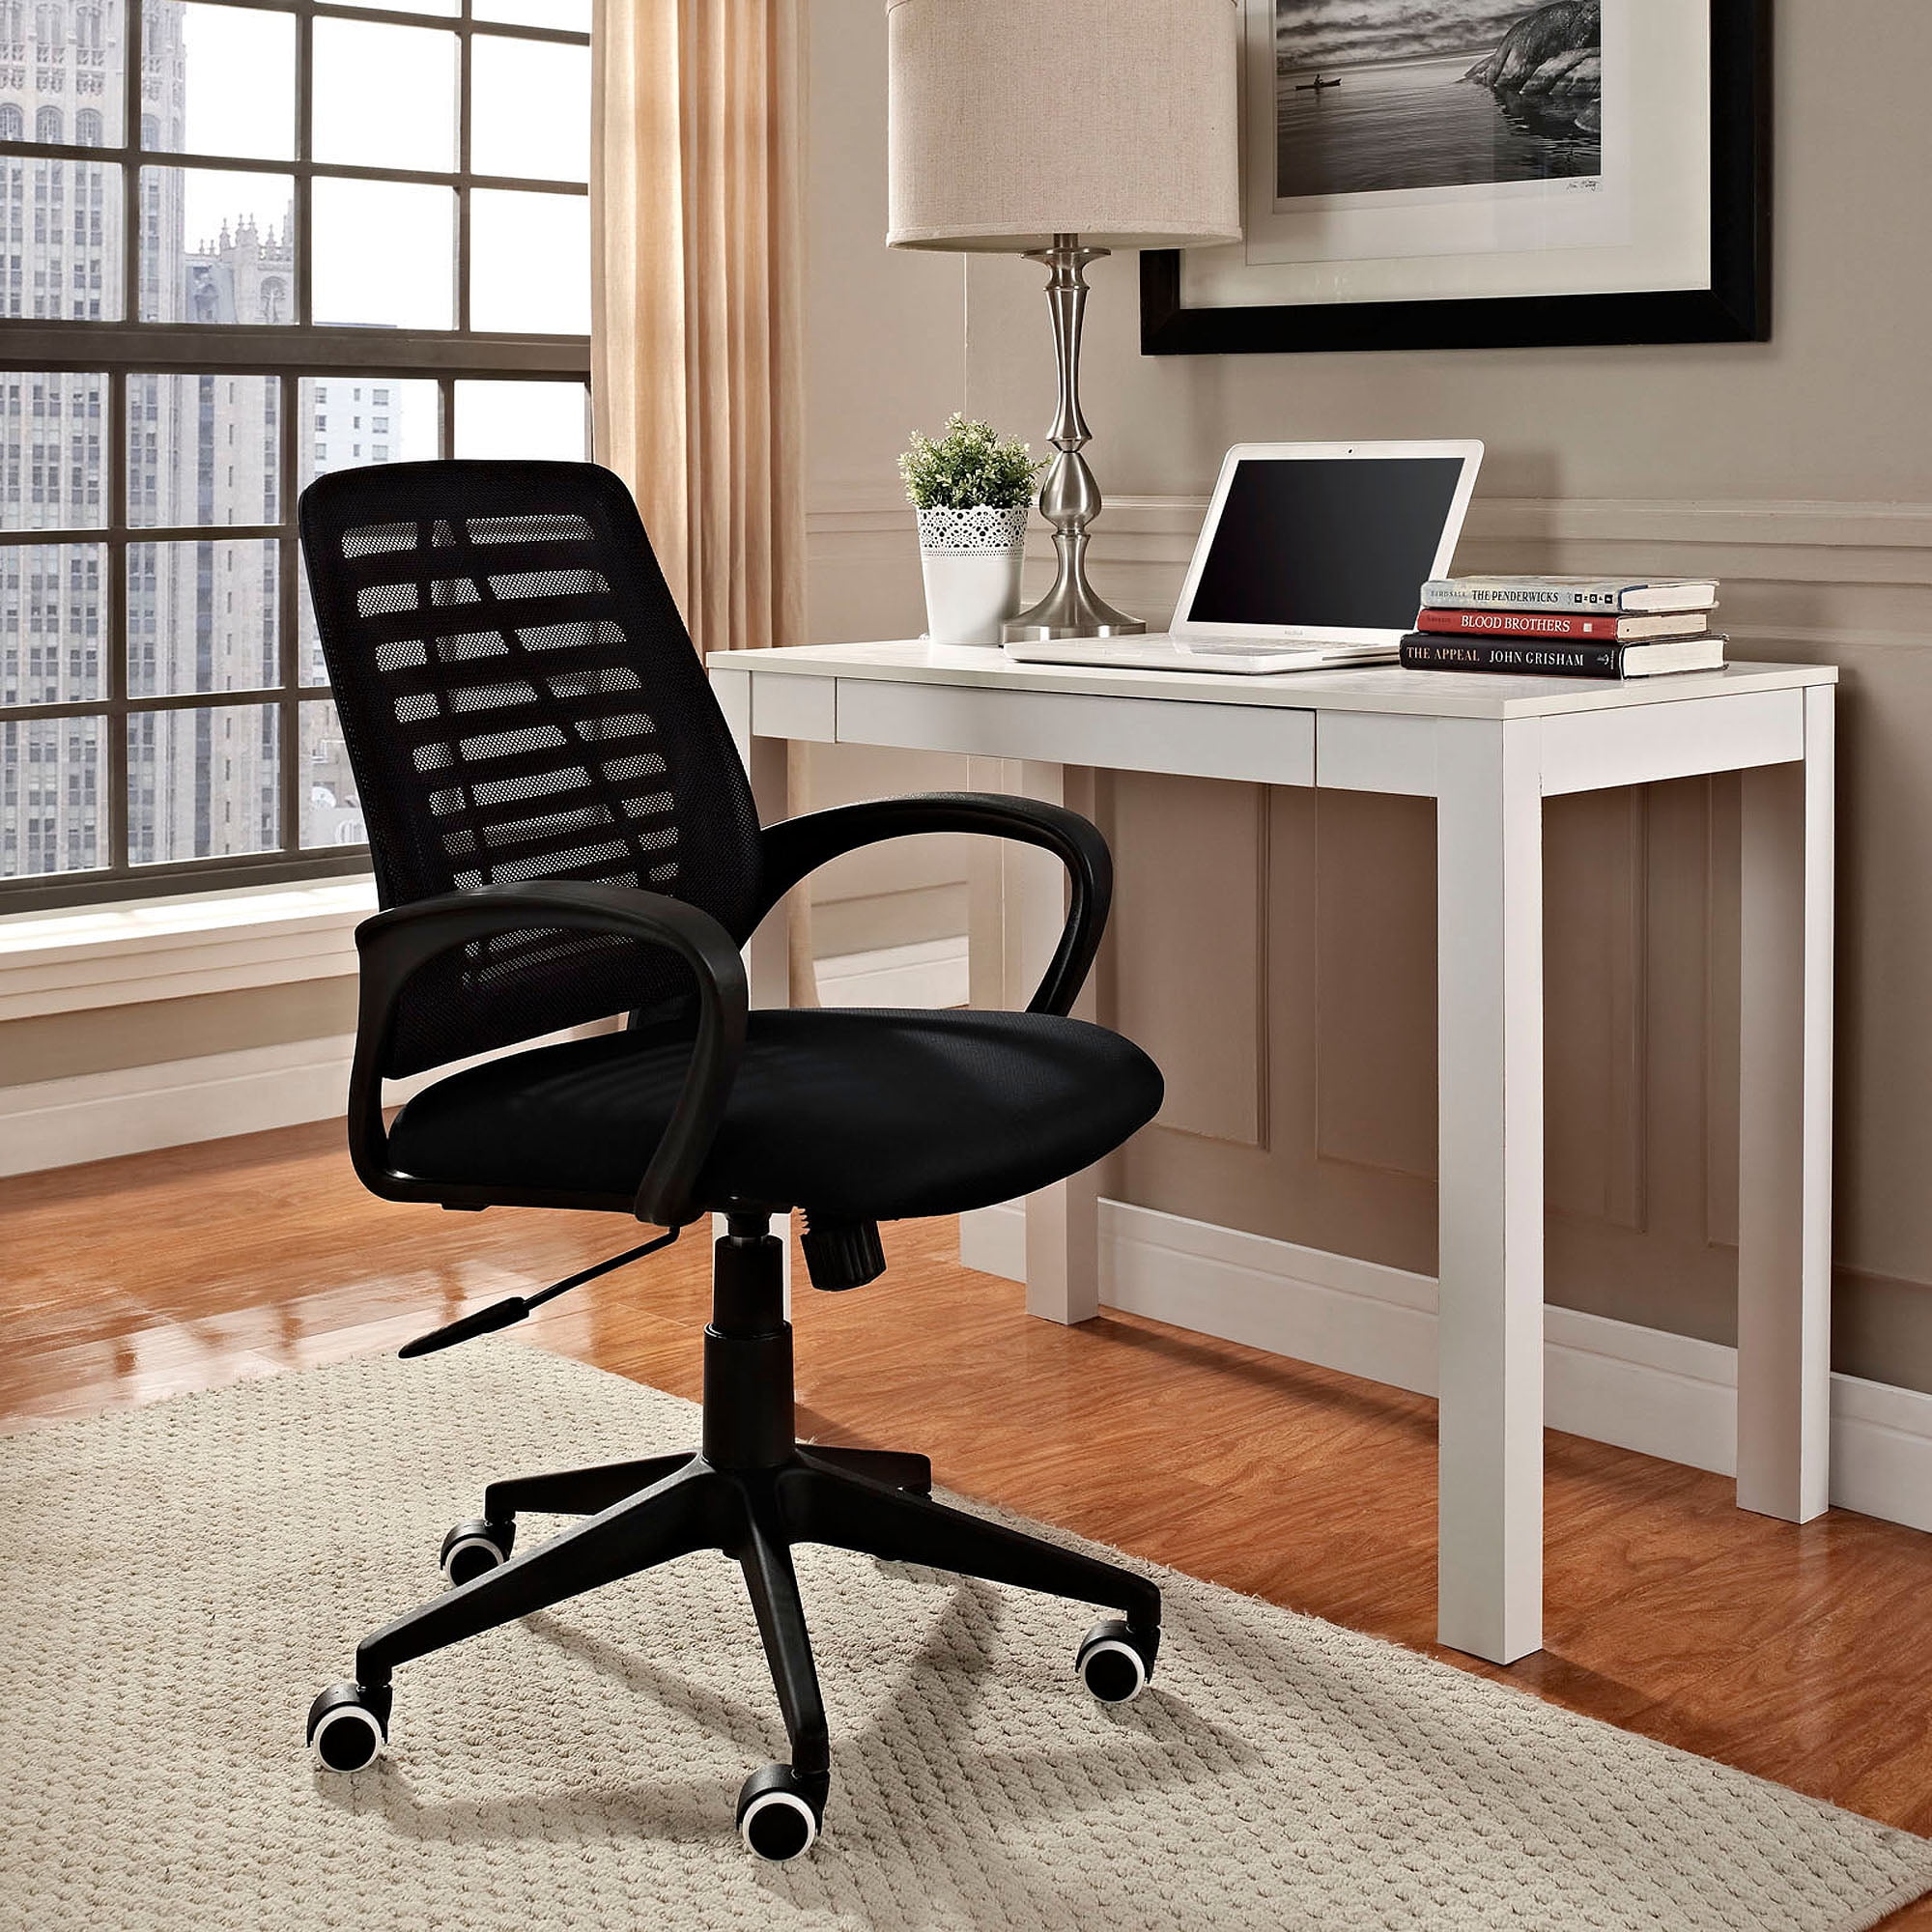 Modway Ardor Mesh Back Office Chair with Arm Rests in Black - Walmart.com